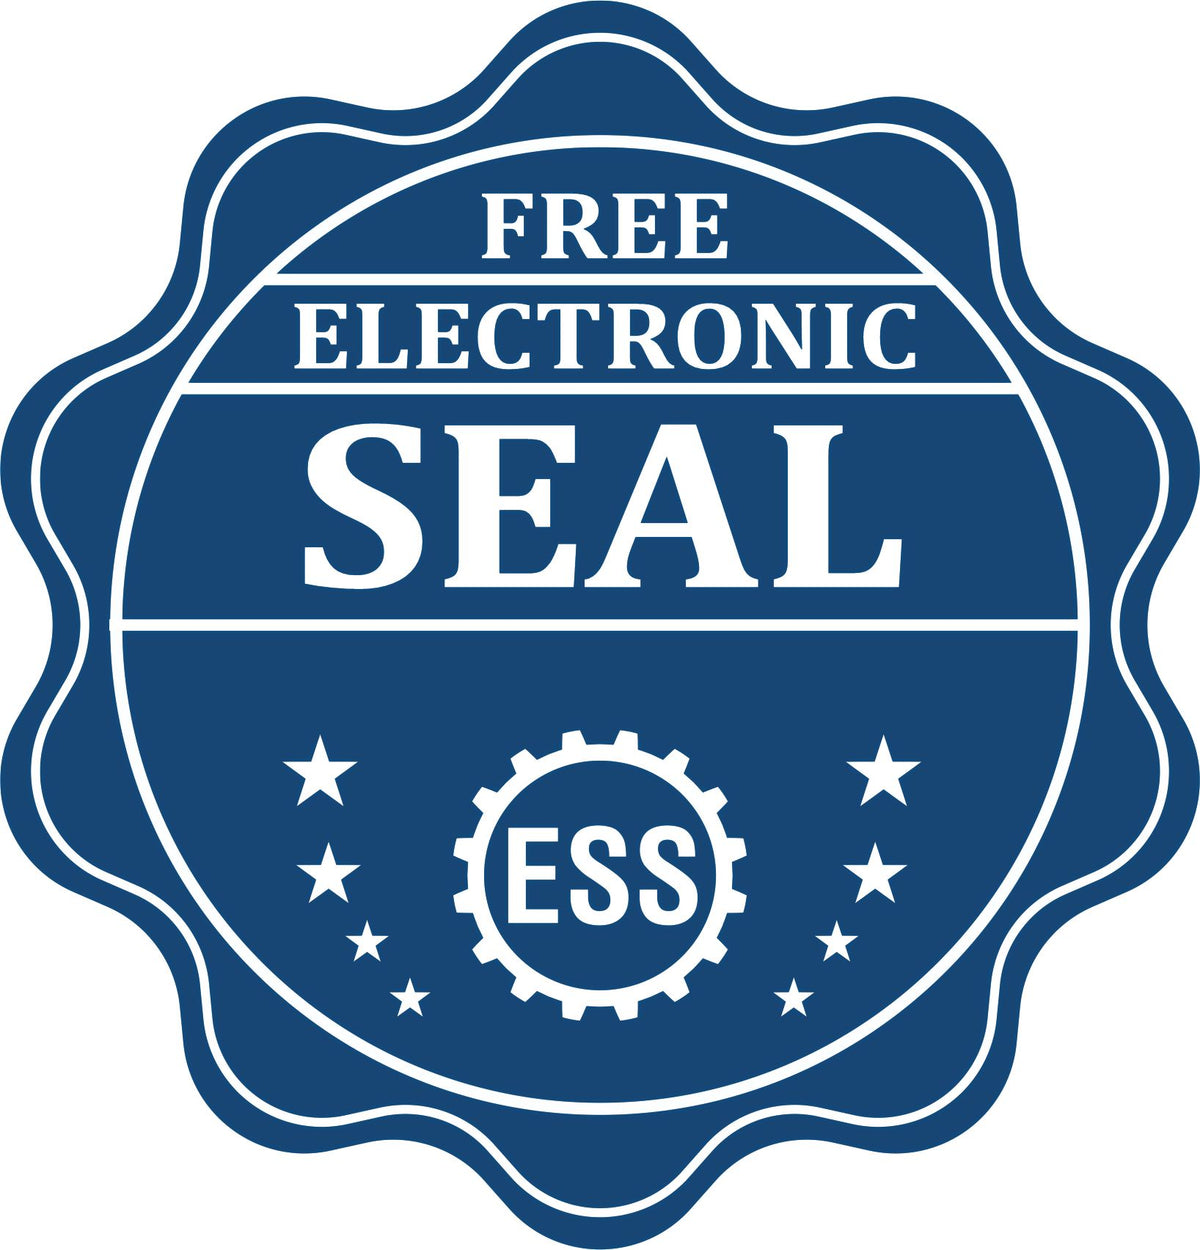 A badge showing a free electronic seal for the Heavy-Duty New Jersey Rectangular Notary Stamp with stars and the ESS gear on the emblem.